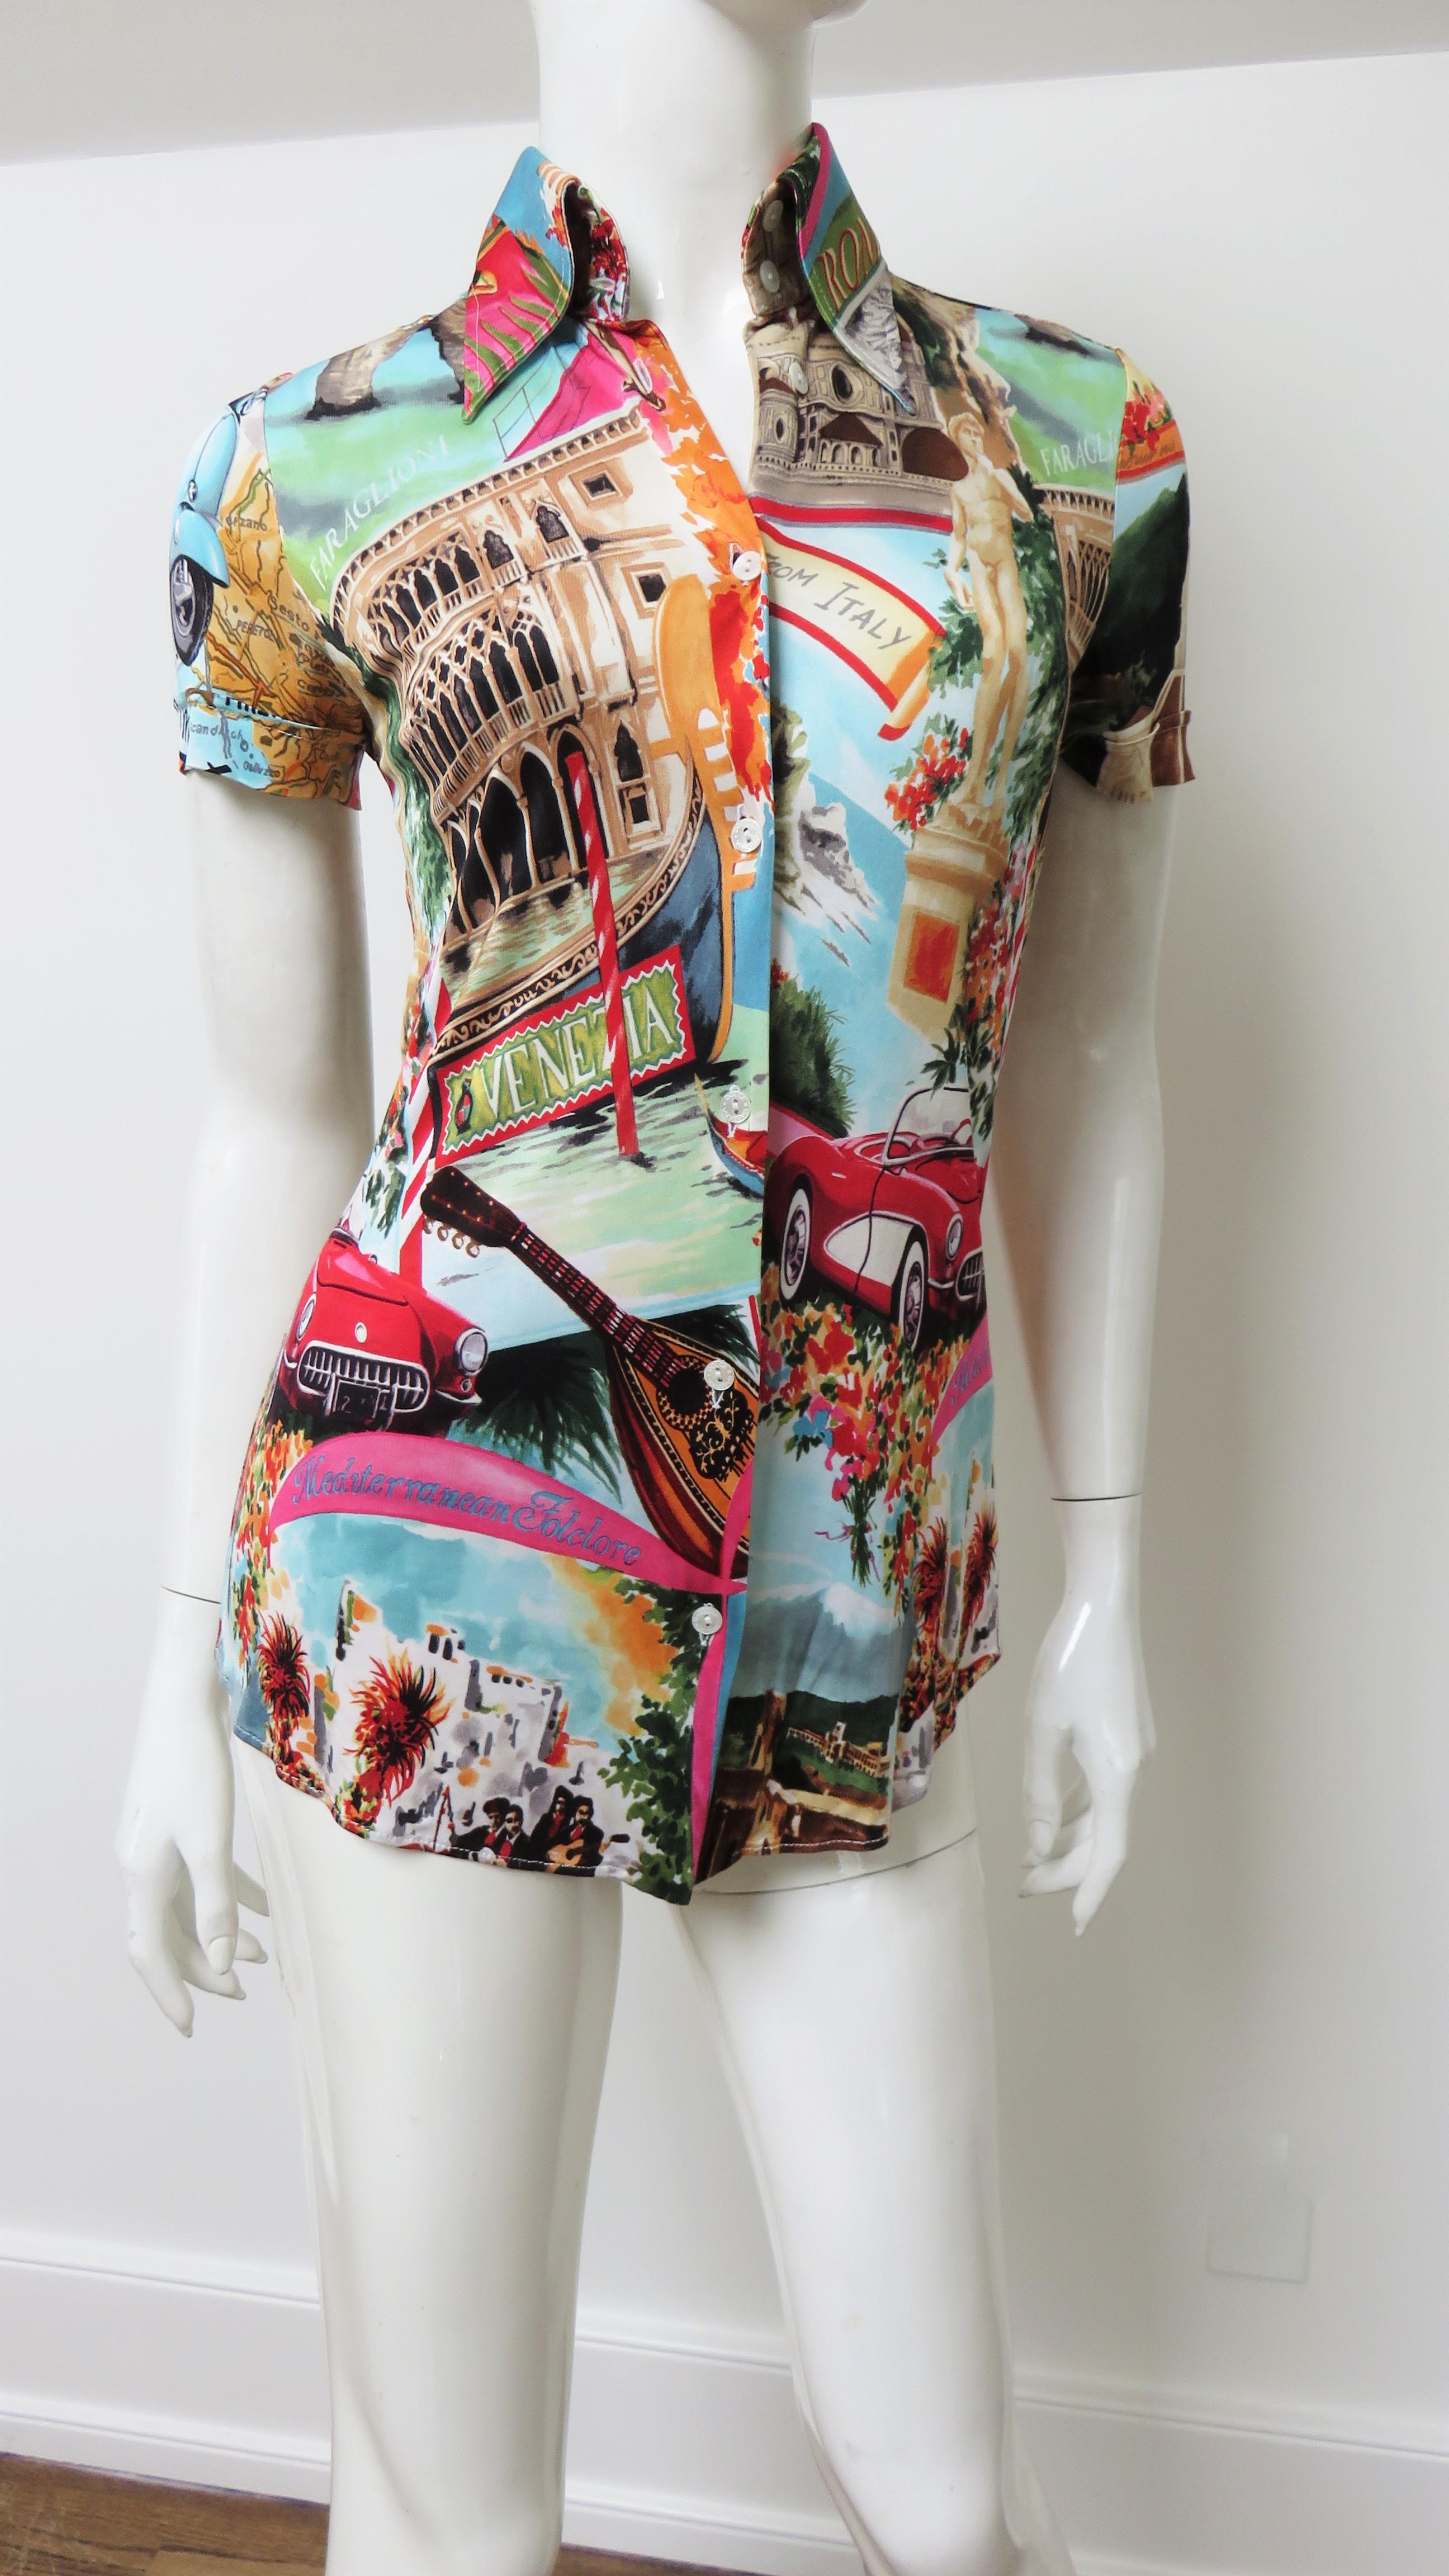 A fabulous fine silk stretch short sleeve shirt in bright colors depicting Italian scenes and words from Dolce & Gabbana. It has a shirt collar, a back yoke and a Dolce & Gabbana inscribed mother of pearl button front closure.  It is covered in